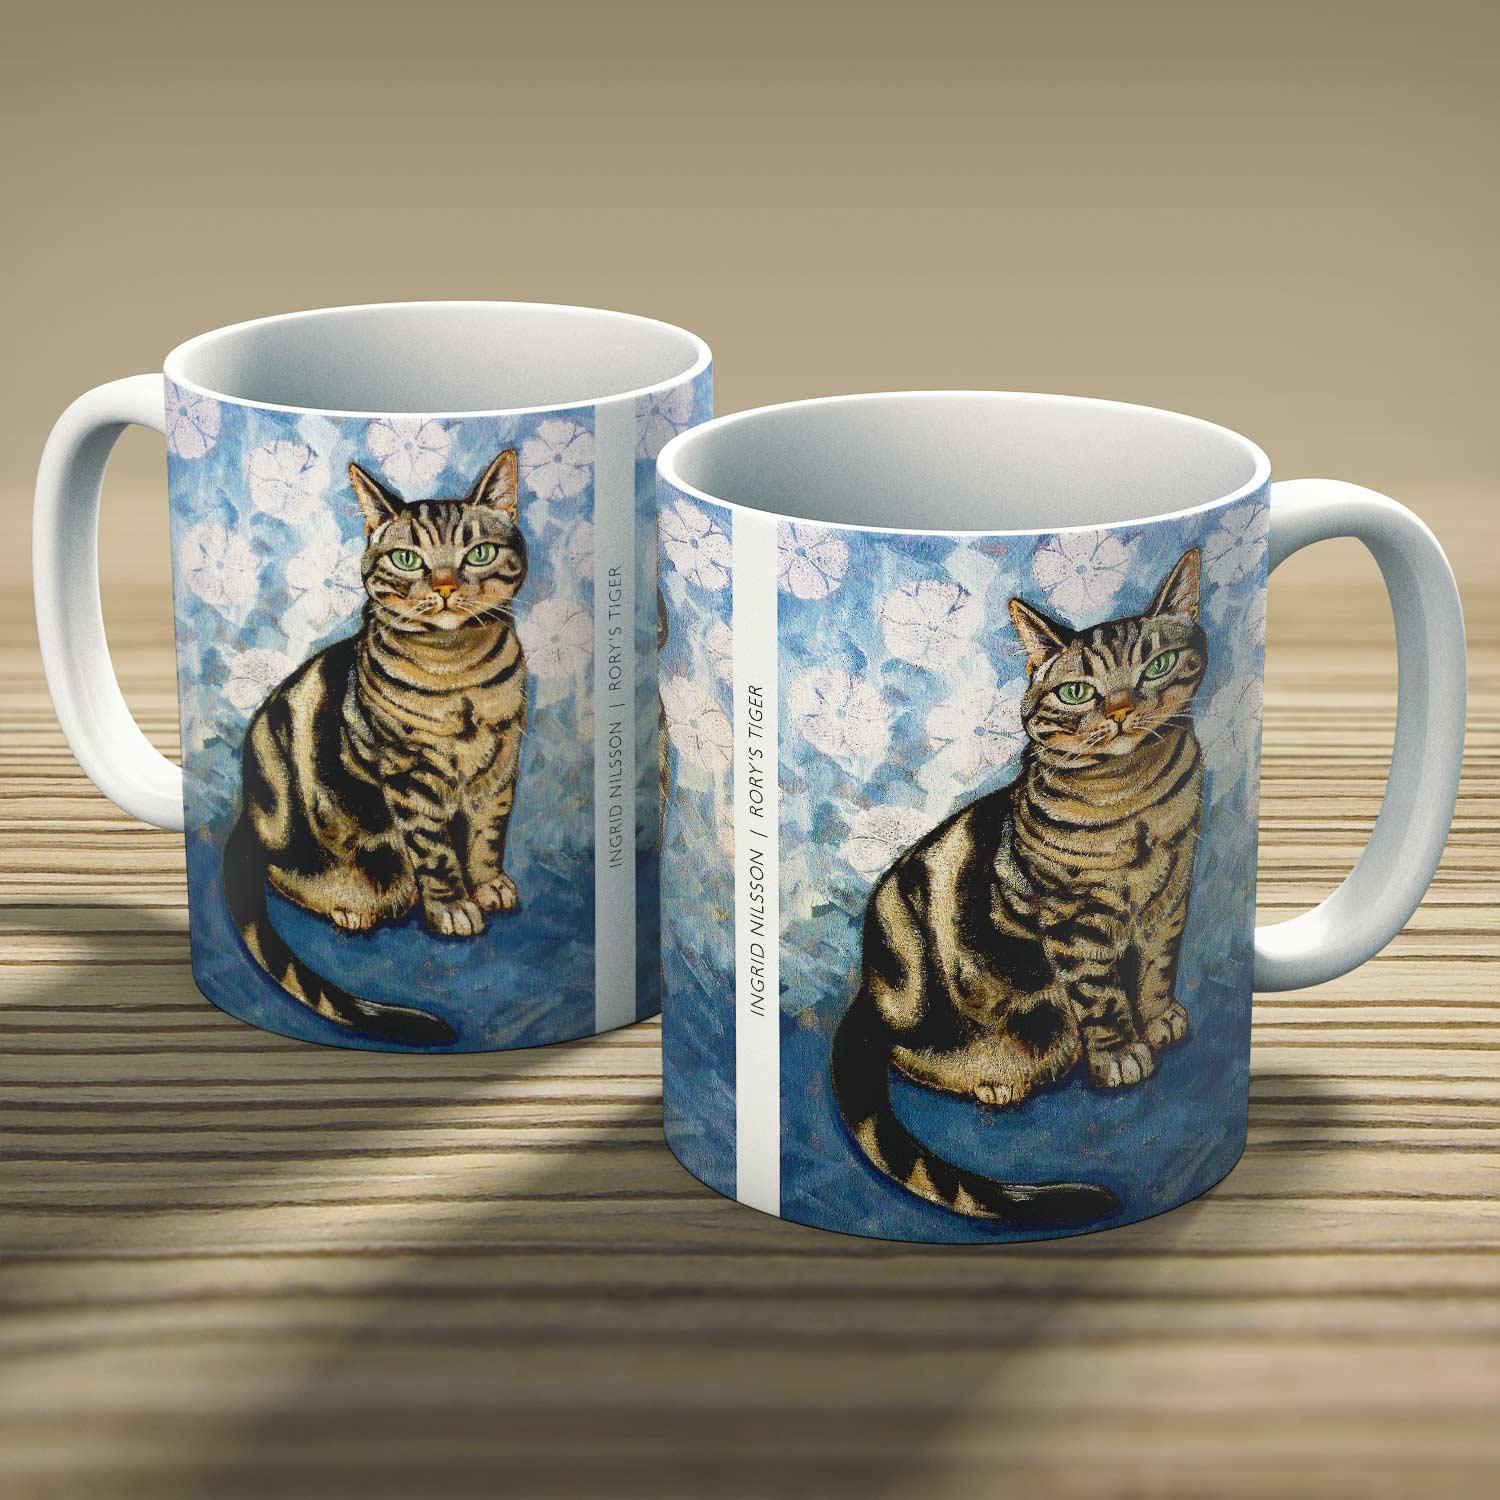 Rorys Tiger Mug from an original painting by artist Ingrid Nilsson